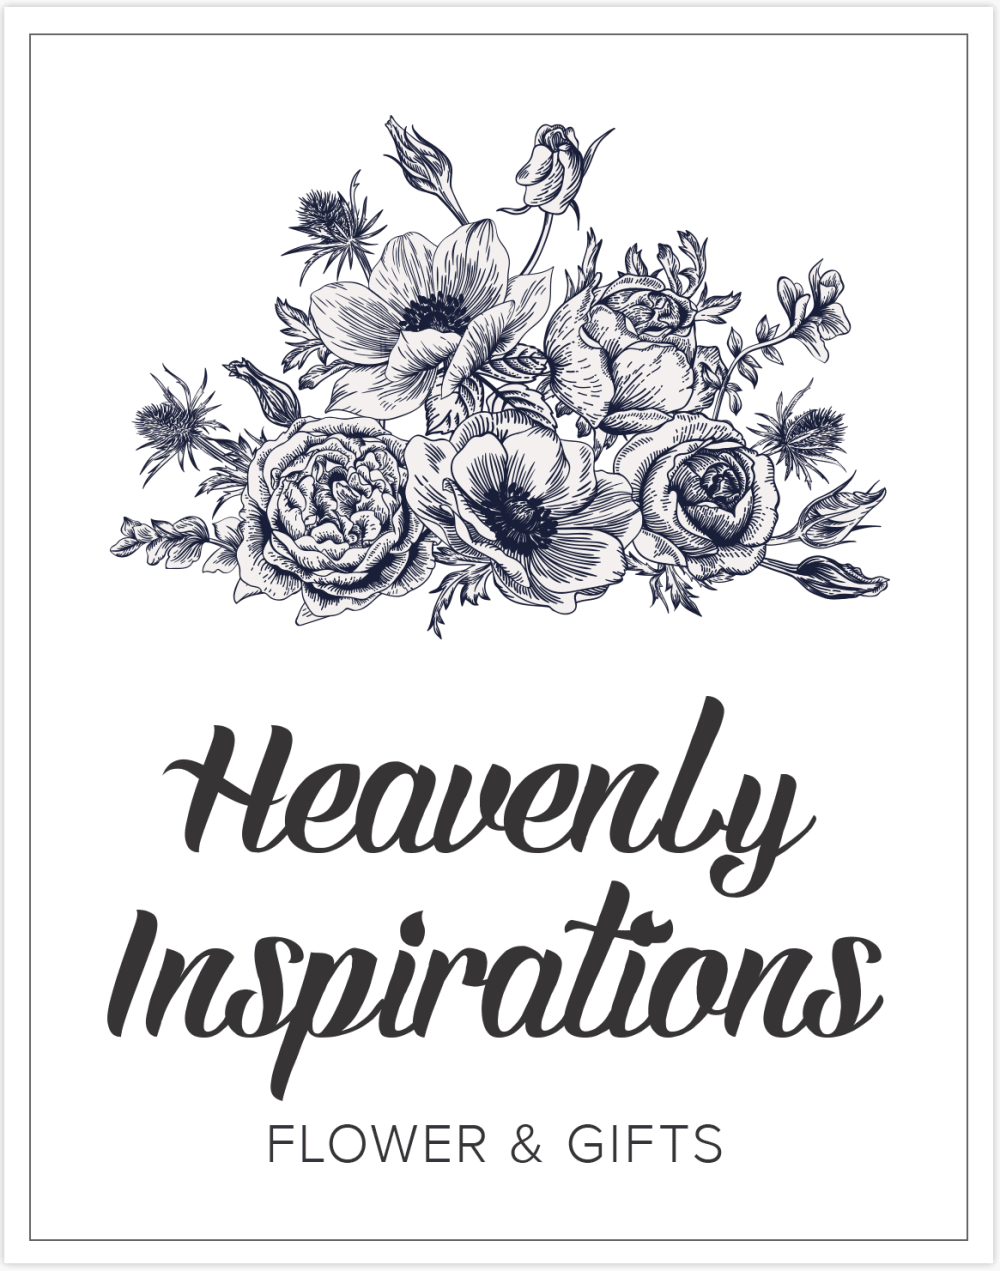 Heavenly Inspirations Flowers & Gifts - Ludlow, MA florist